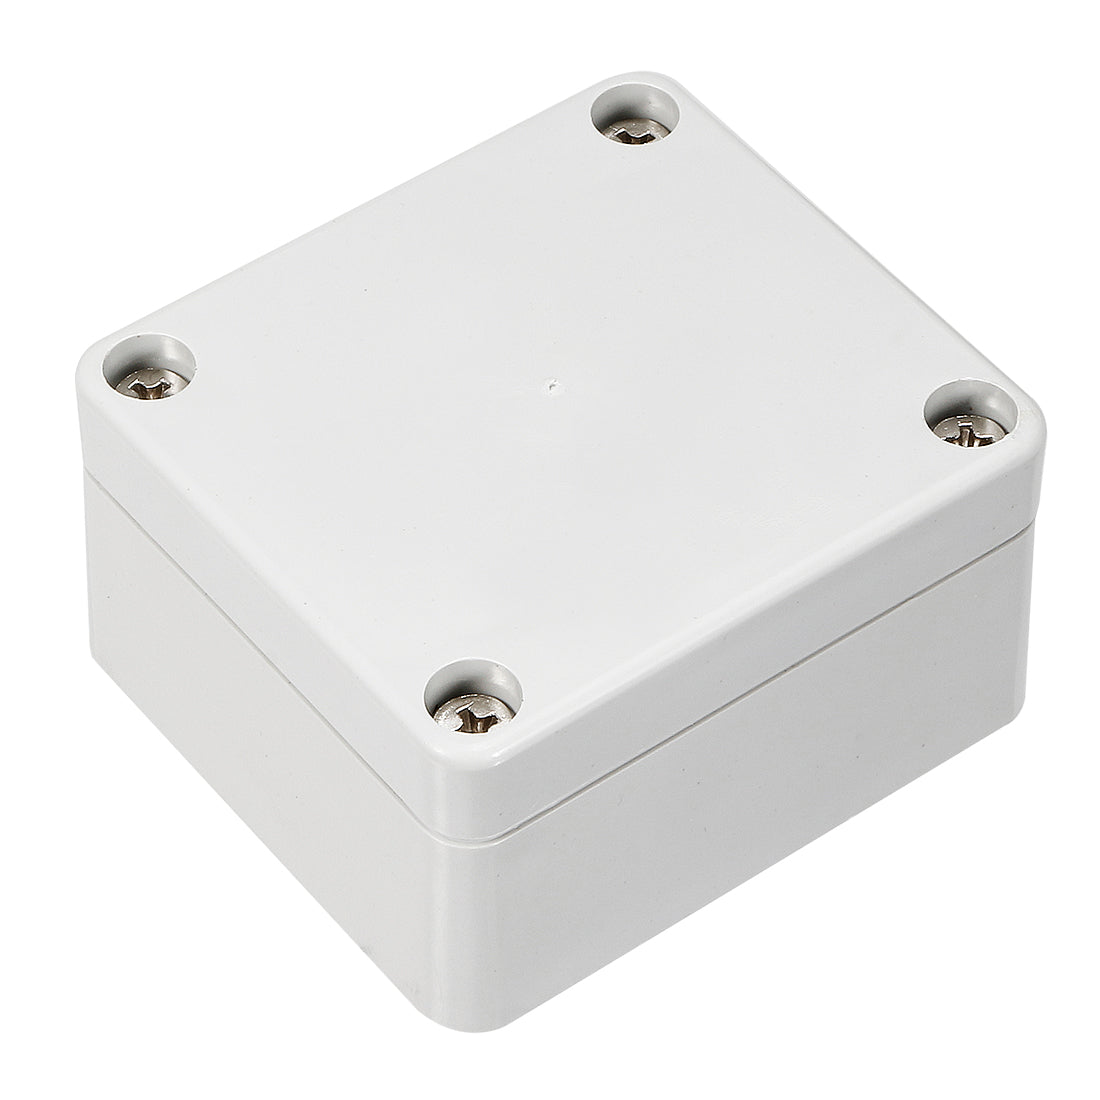 uxcell Uxcell 2pcs 2.48" x 2.24" x 1.38" (63mmx57mmx35mm) ABS Junction Box Universal Project Enclosure